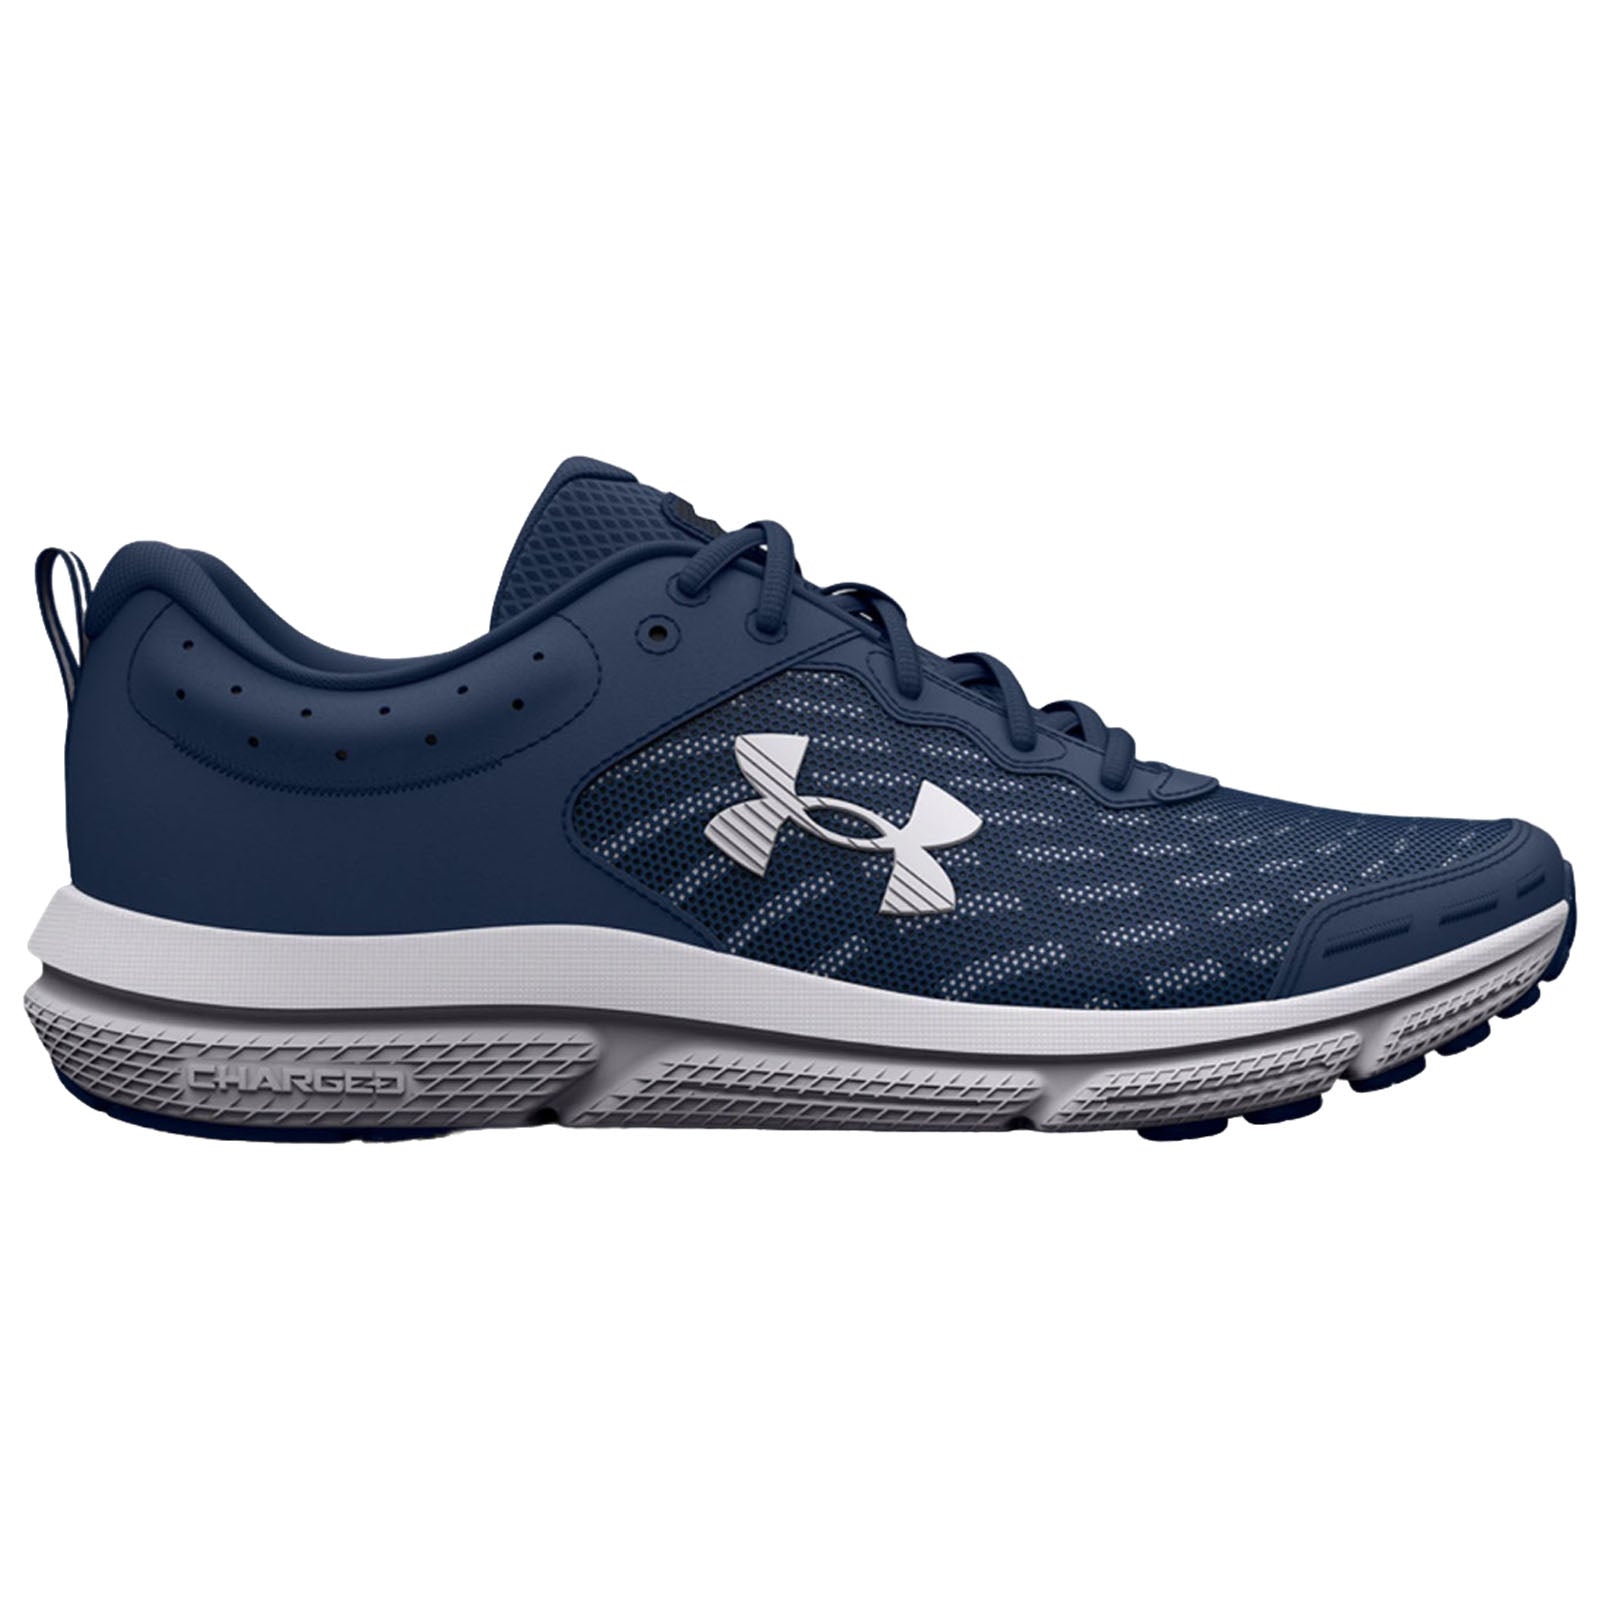 Under Armour Mens Charged Assert 10 Trainers